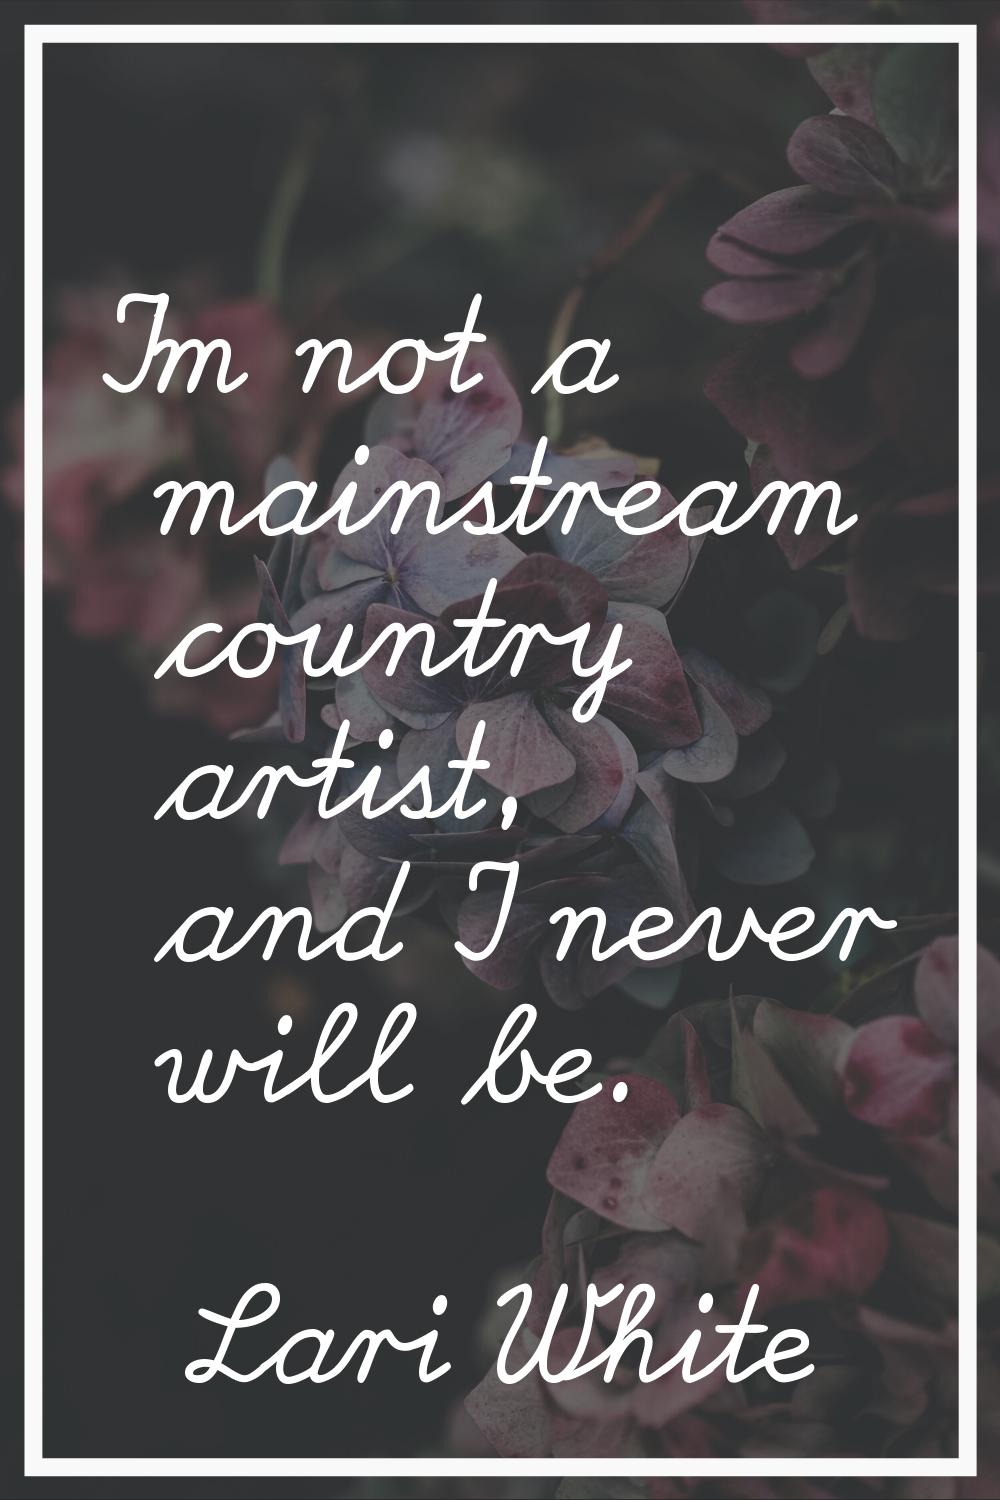 I'm not a mainstream country artist, and I never will be.